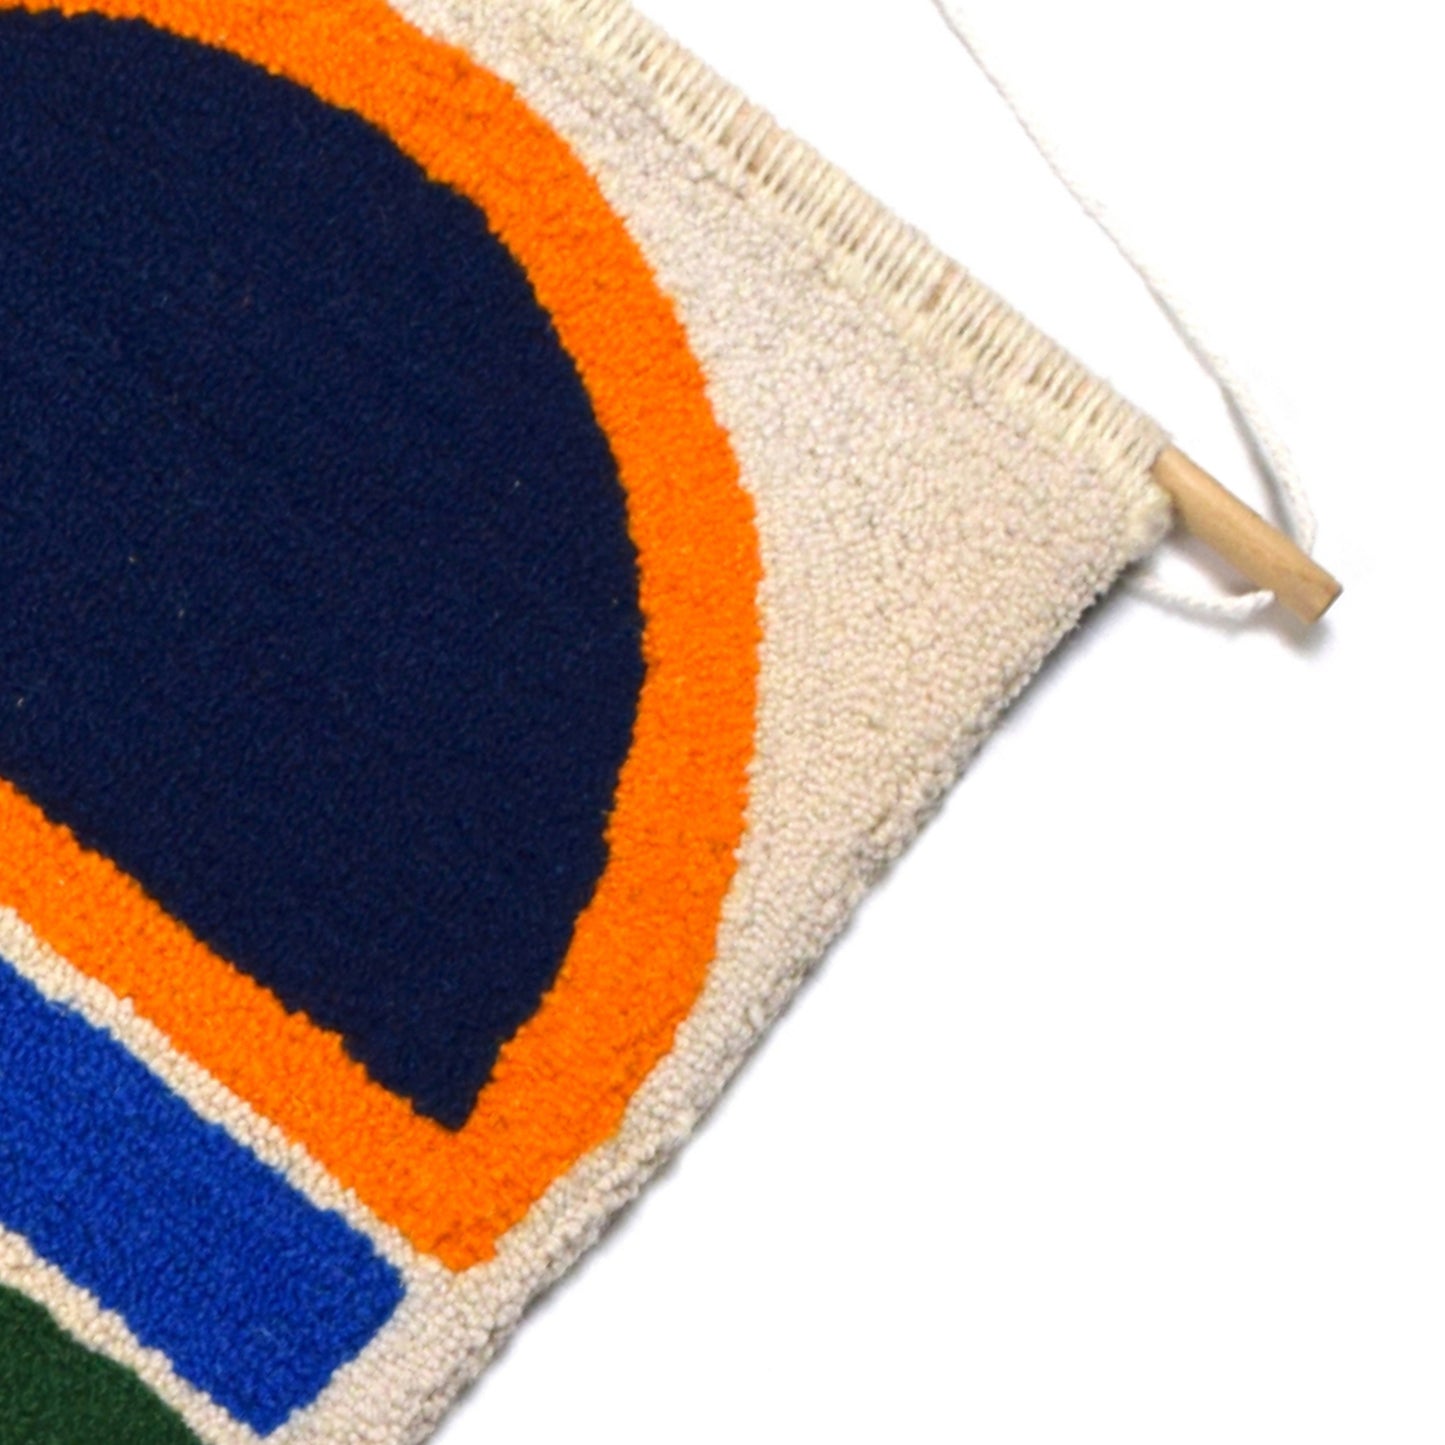 RETRO - Orange, Blue and Green - Hand Tufted Wall Hanging